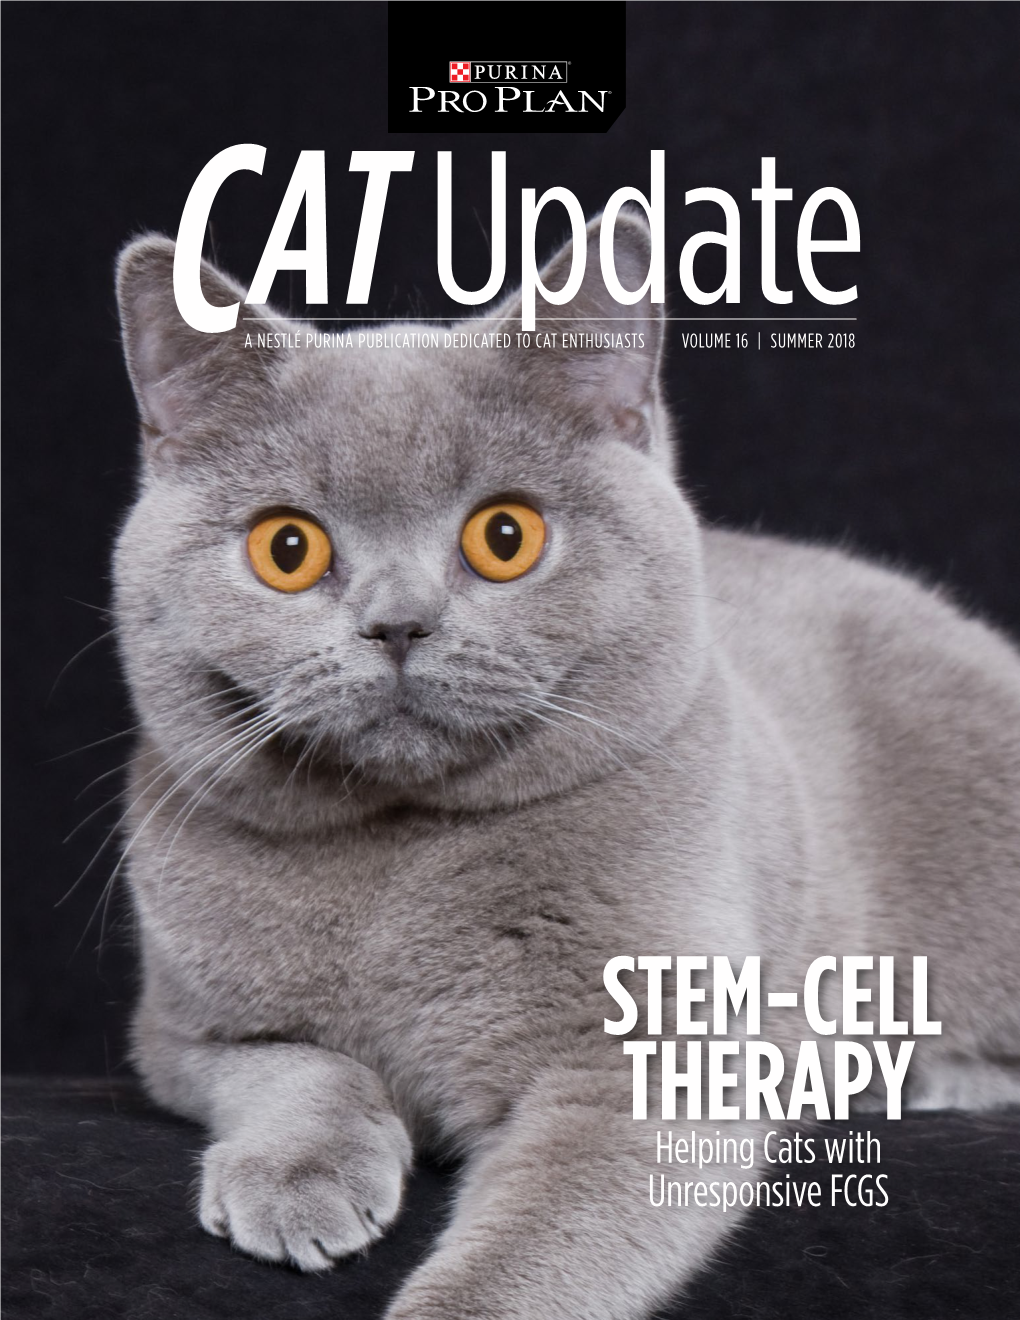 STEM-CELL THERAPY Helping Cats with Unresponsive FCGS SUMMER 2018 STEM-CELL THERAPY MAY HELP CATS RESISTANT to TRADITIONAL TREATMENT for FCGS